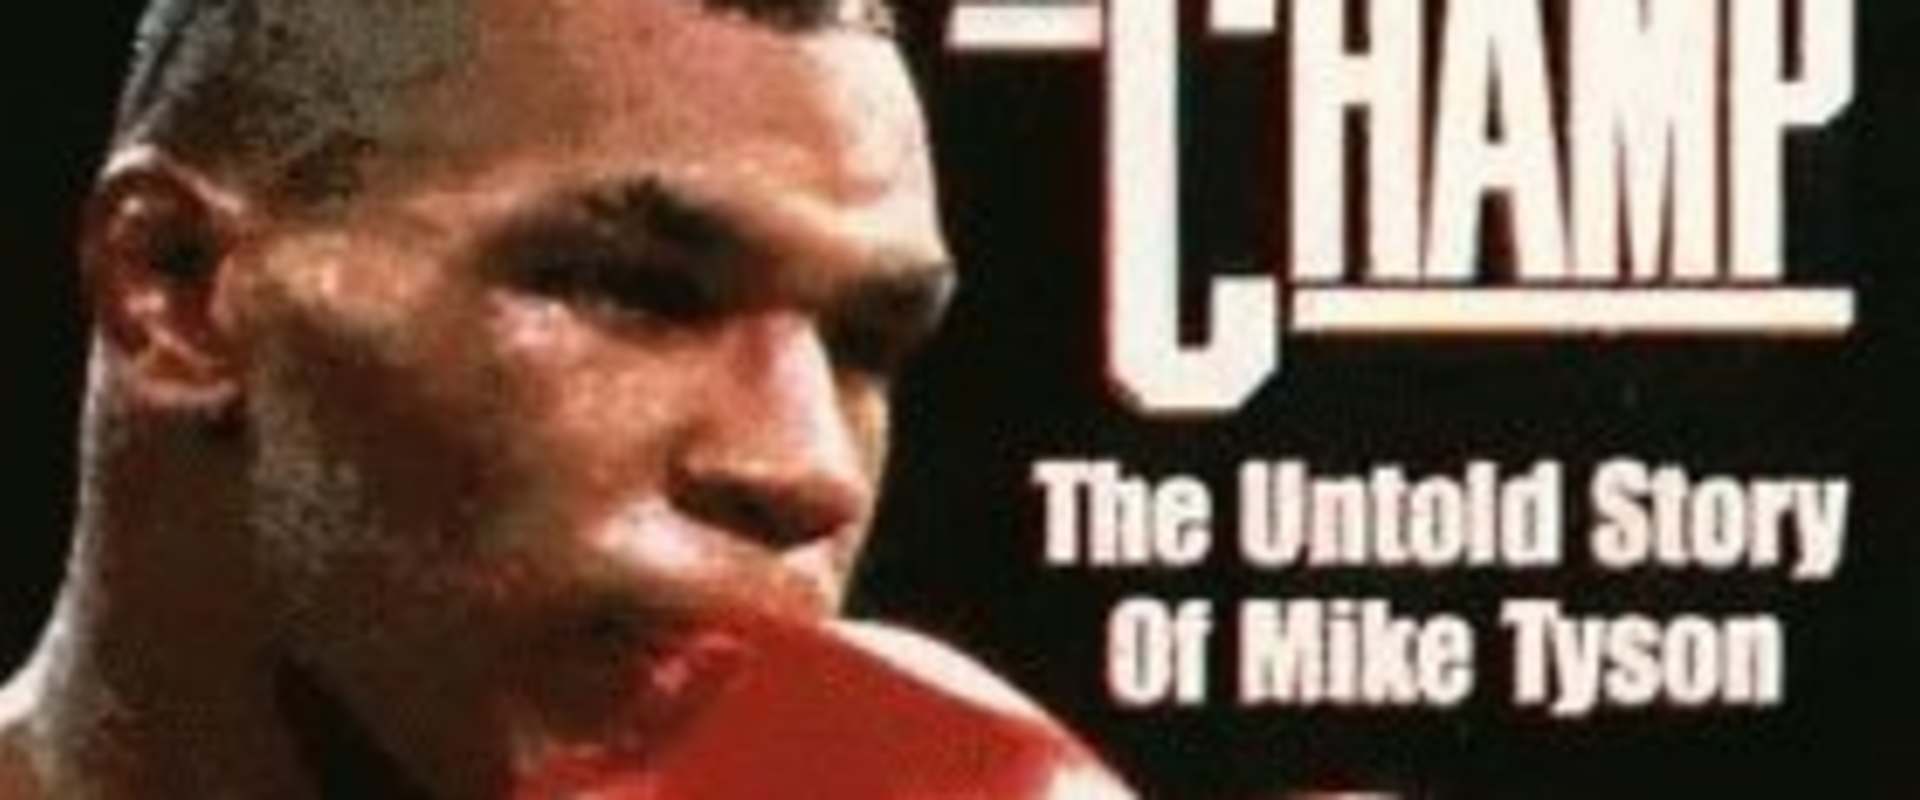 Fallen Champ: The Untold Story of Mike Tyson background 1